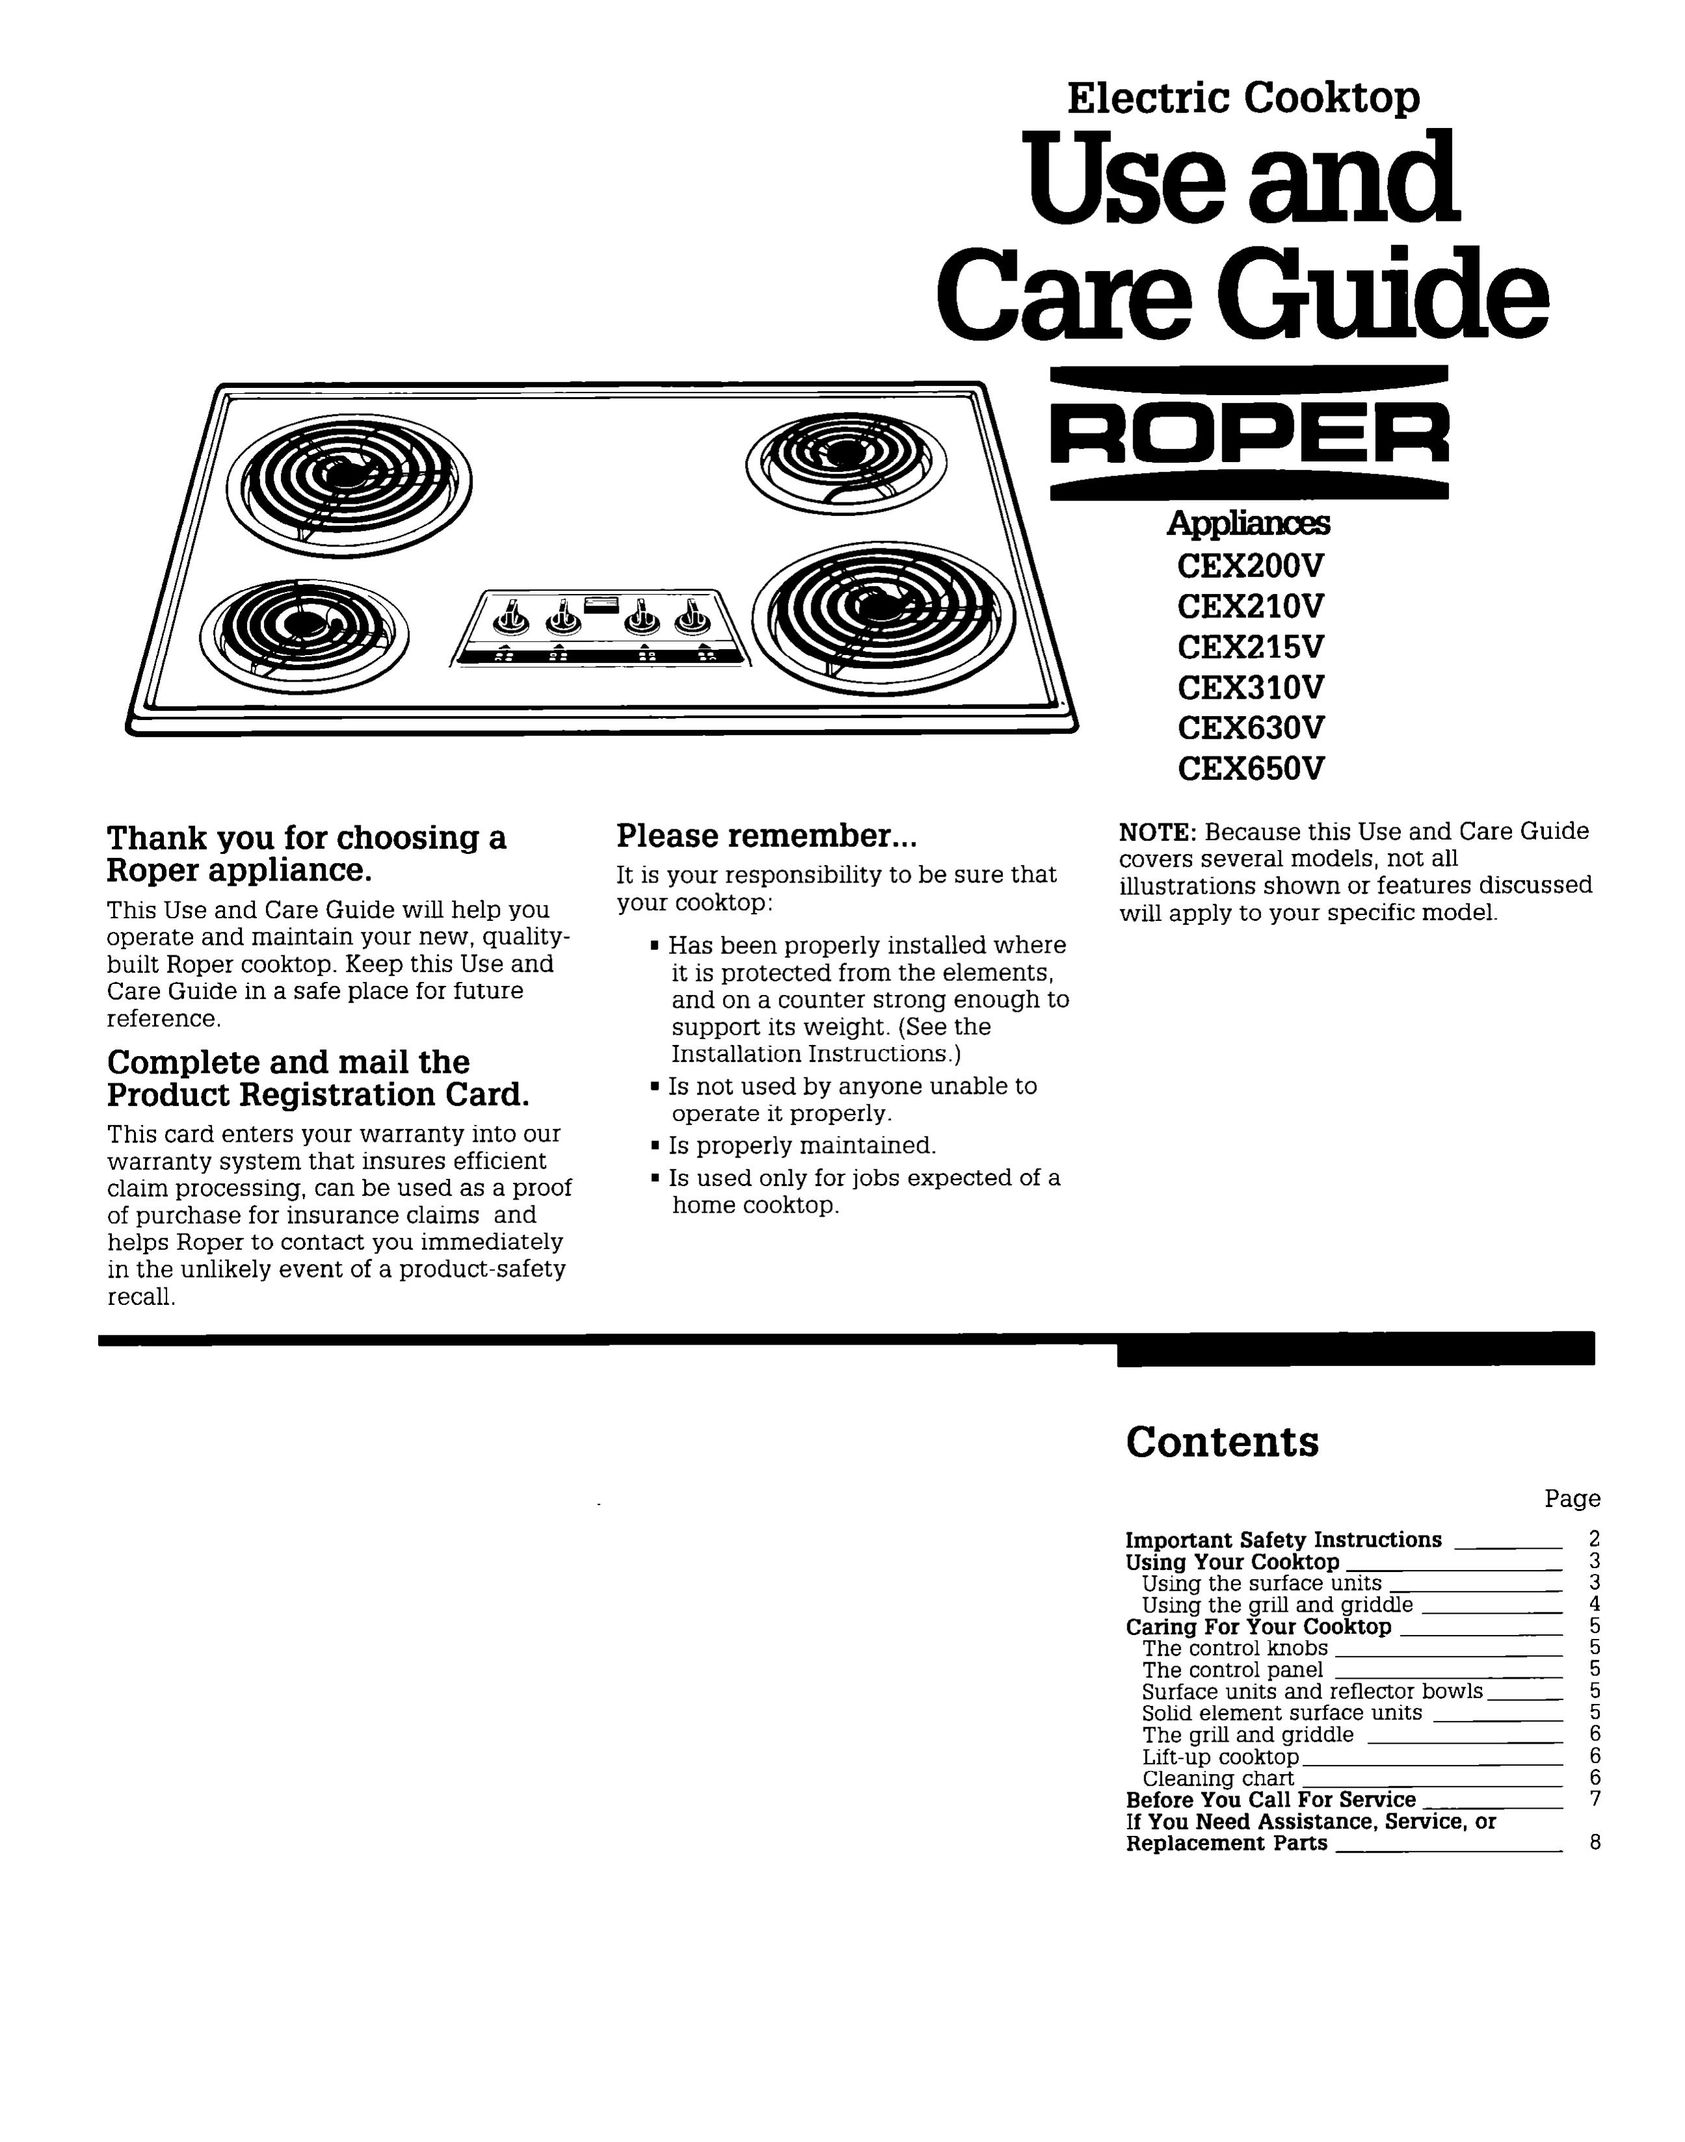 Whirlpool CEX200V Cooktop User Manual